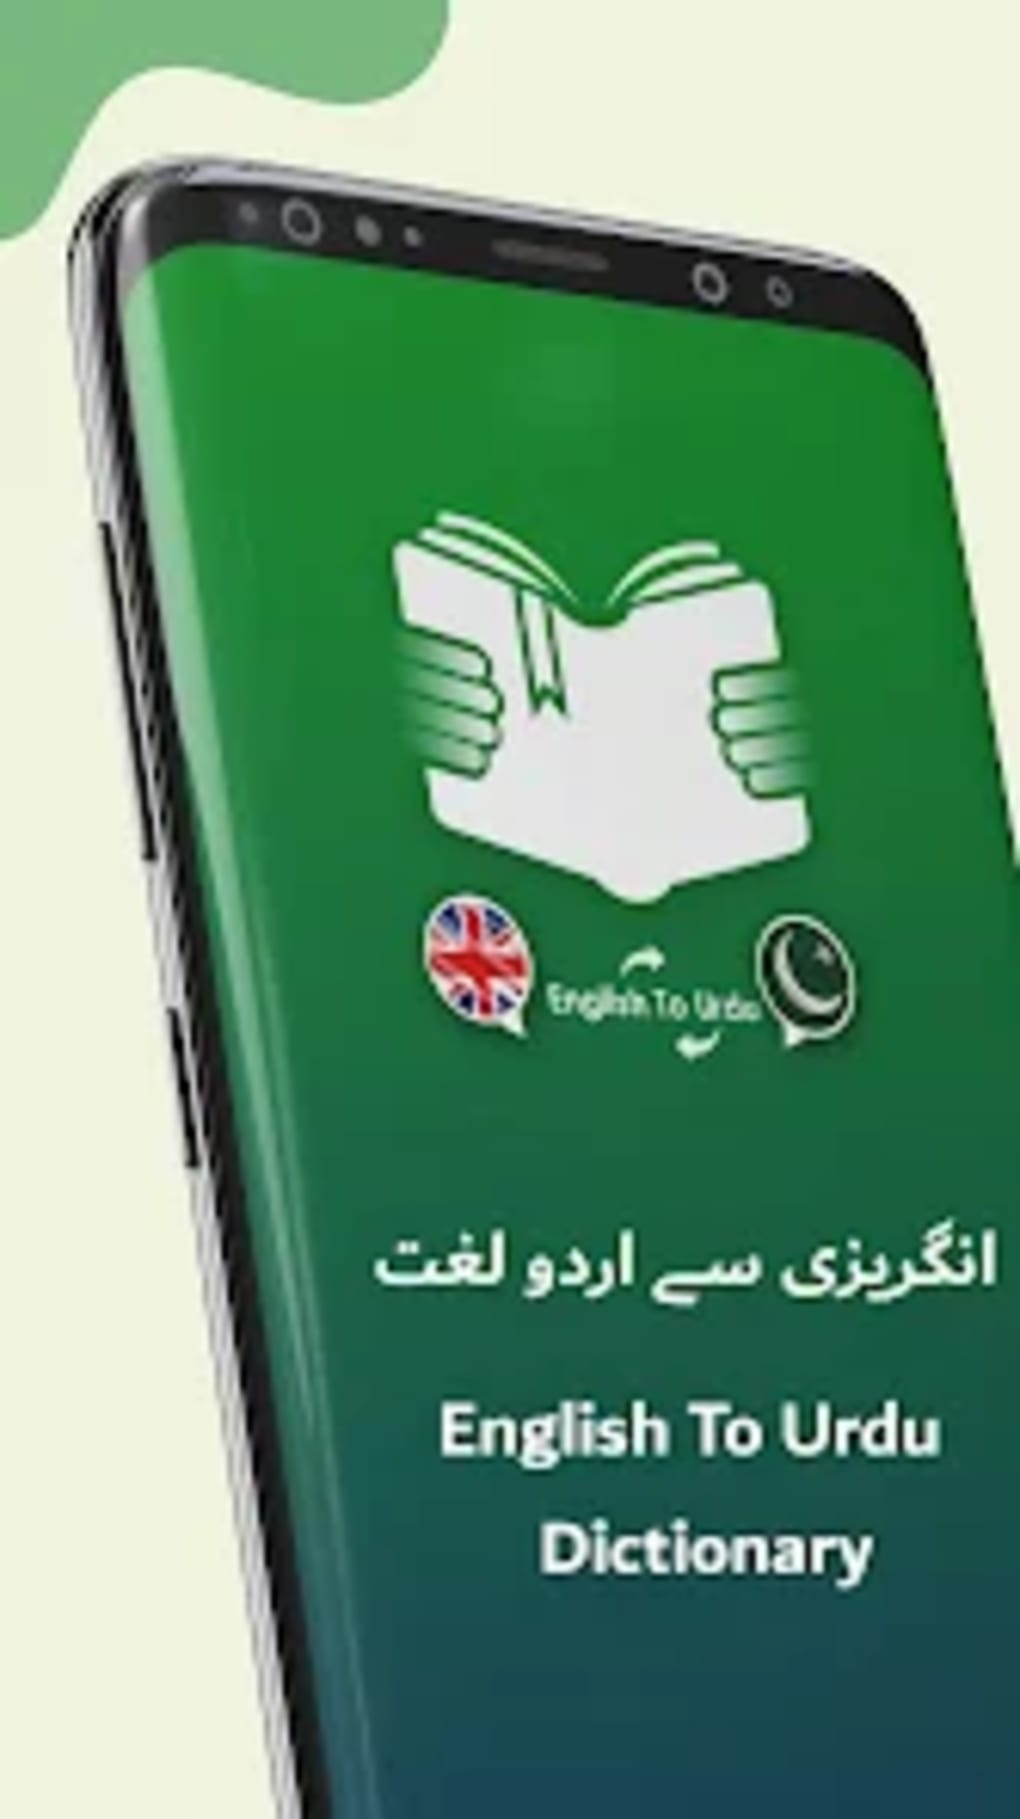 english-to-urdu-dictionary-android